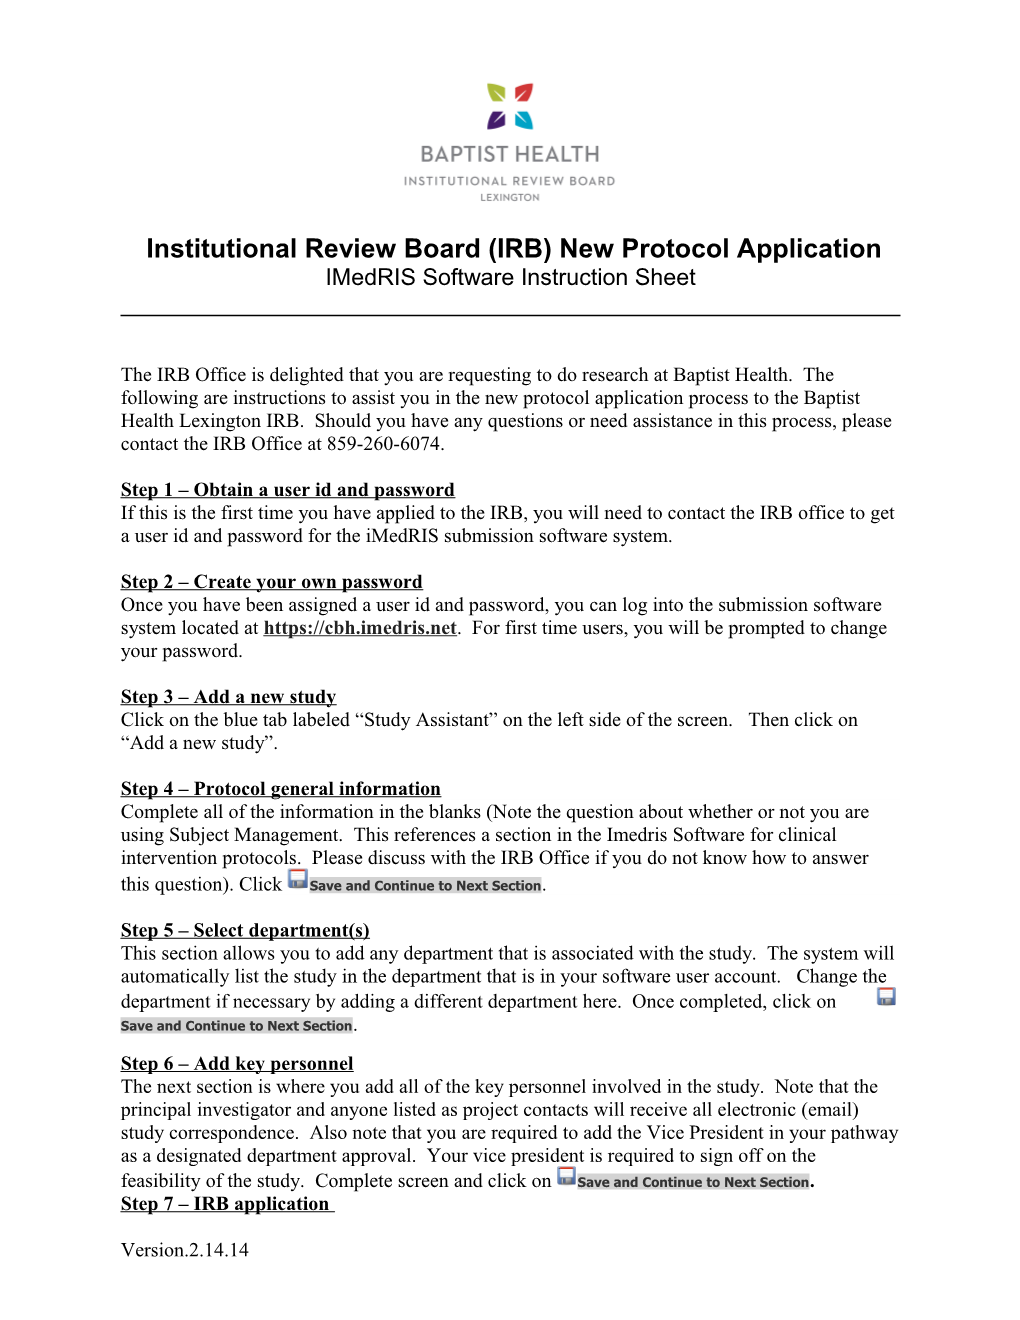 Institutional Review Board (IRB) New Protocol Application